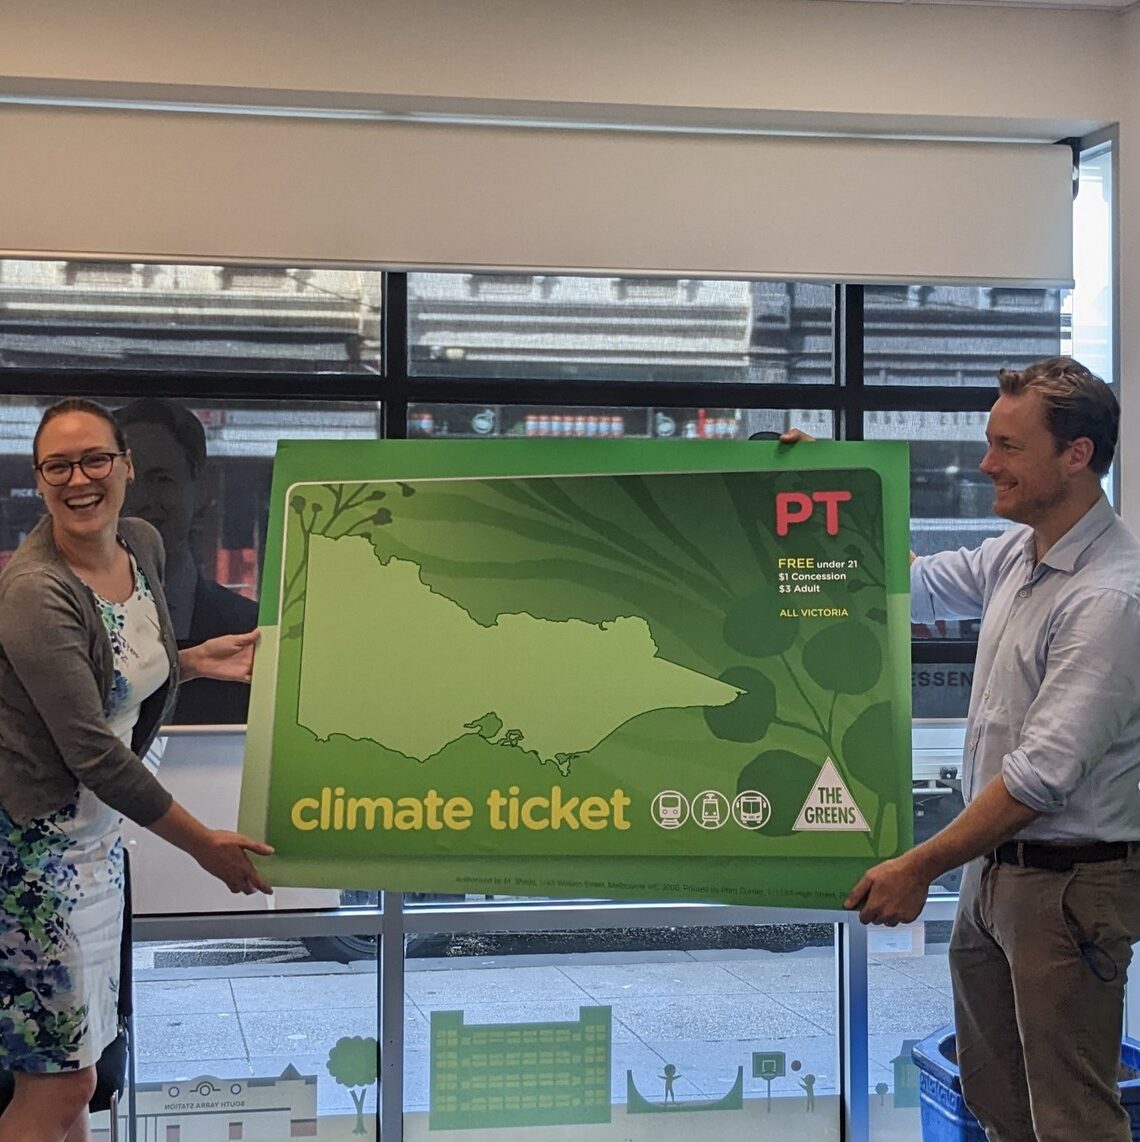 Katherine Copsey MLC and Sam Hibbins MLA hold a large green placard, which looks similar to a green-tinted myki card, with "climate ticket" on it